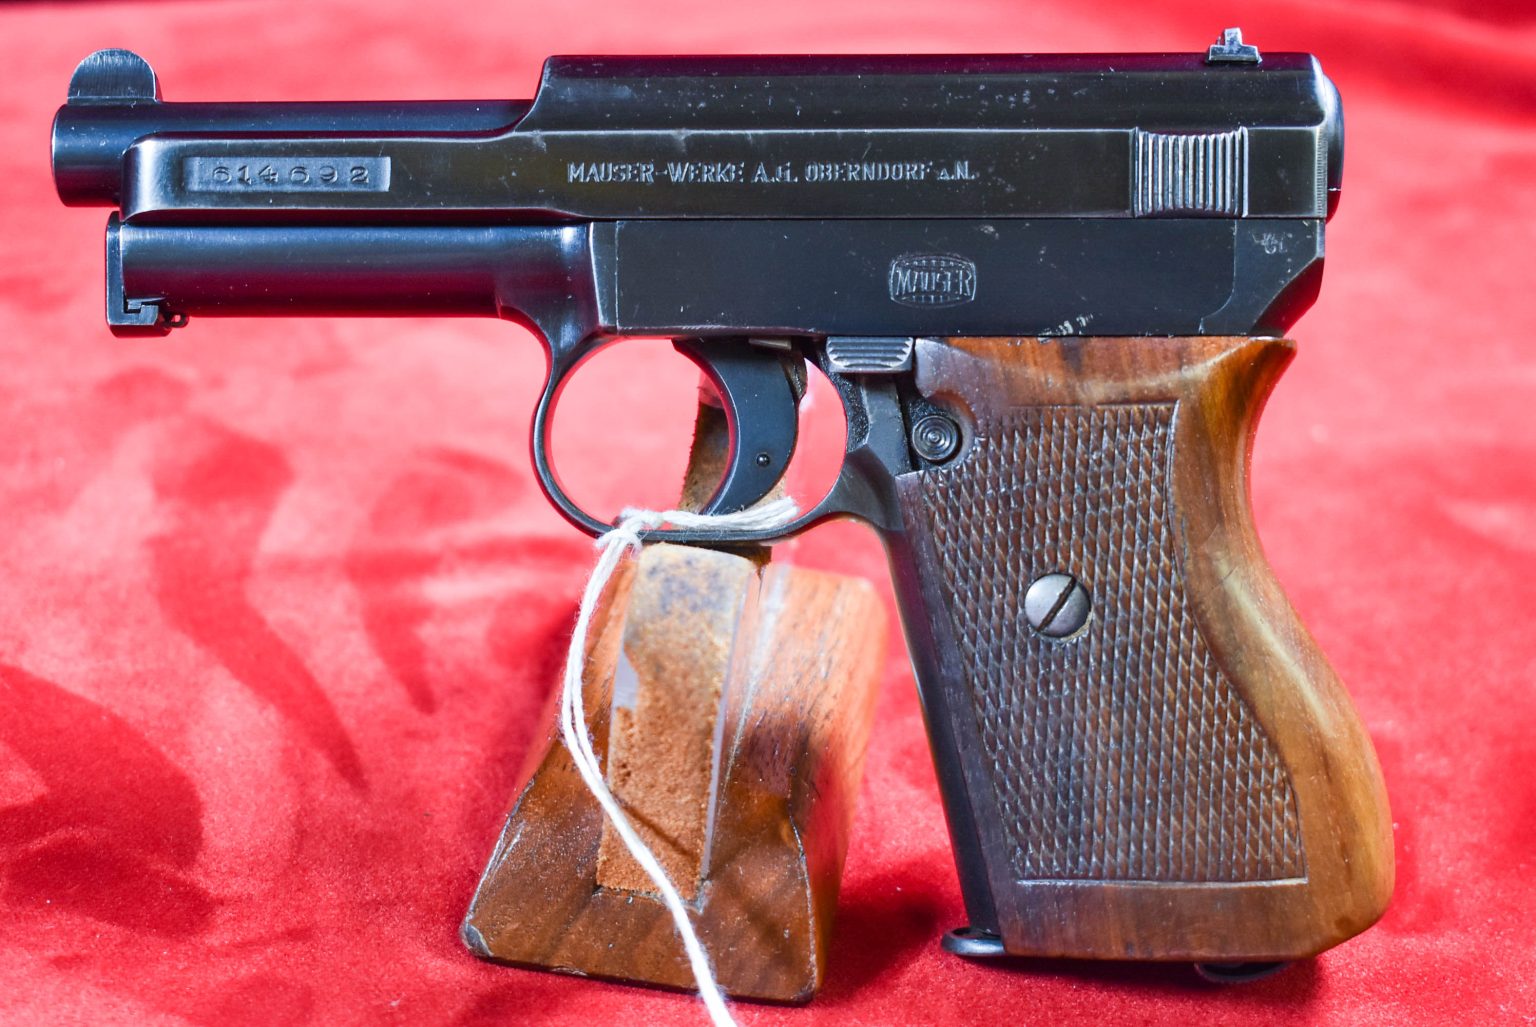 Wed Apr 19 Very Scarce Mauser Model 1934 Pistol Nazi Police Eaglel Marked Only 1500 Issued 8360